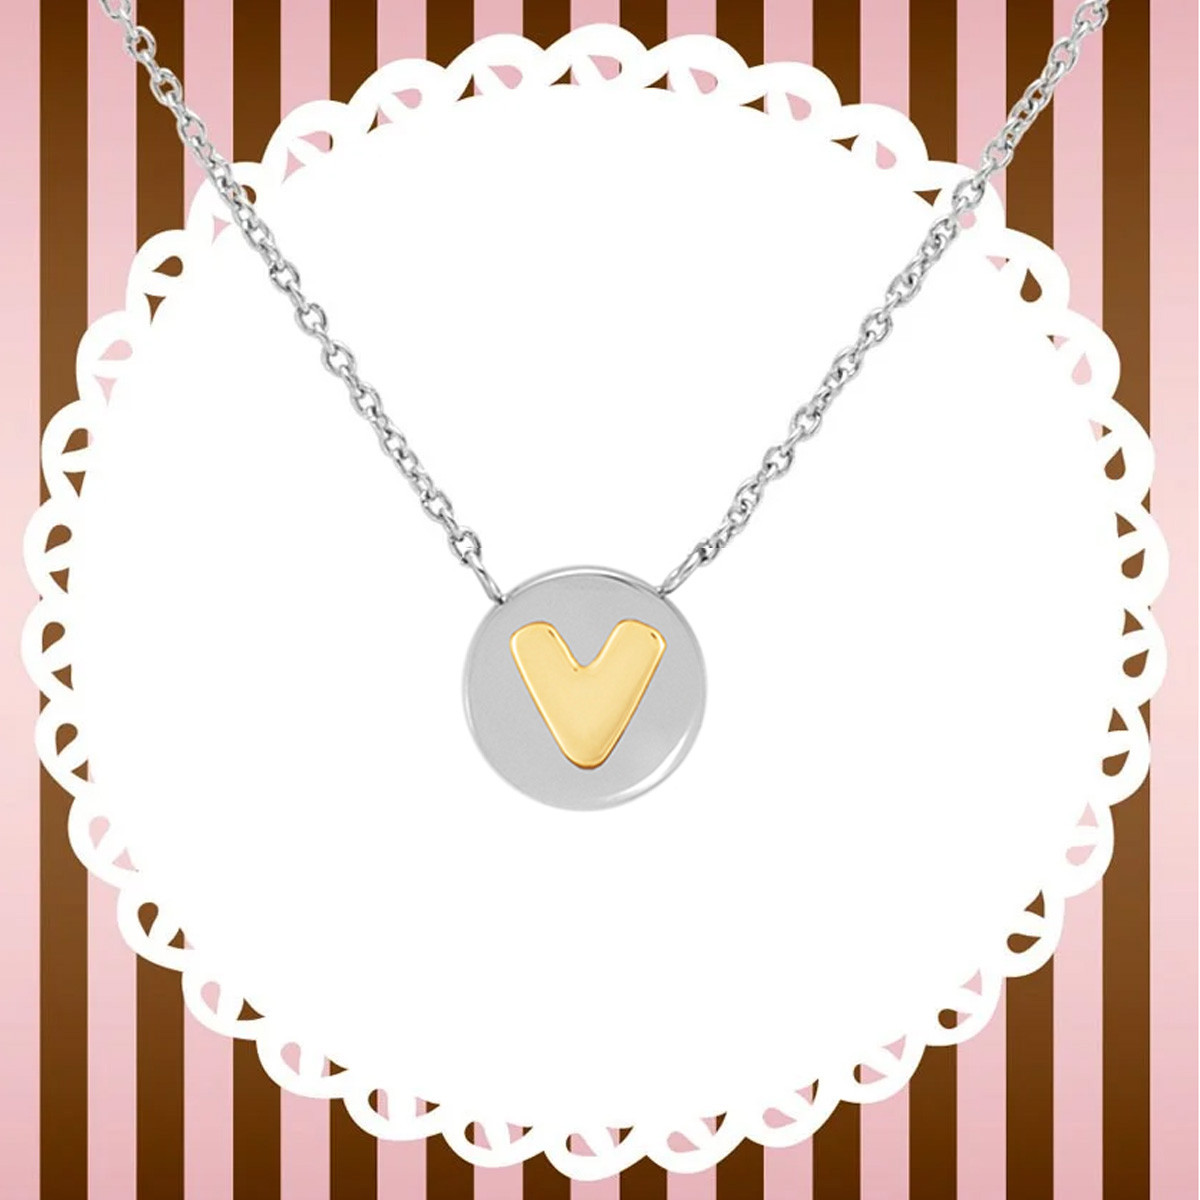 NECKLACE WITH THE LETTER V IN GOLD